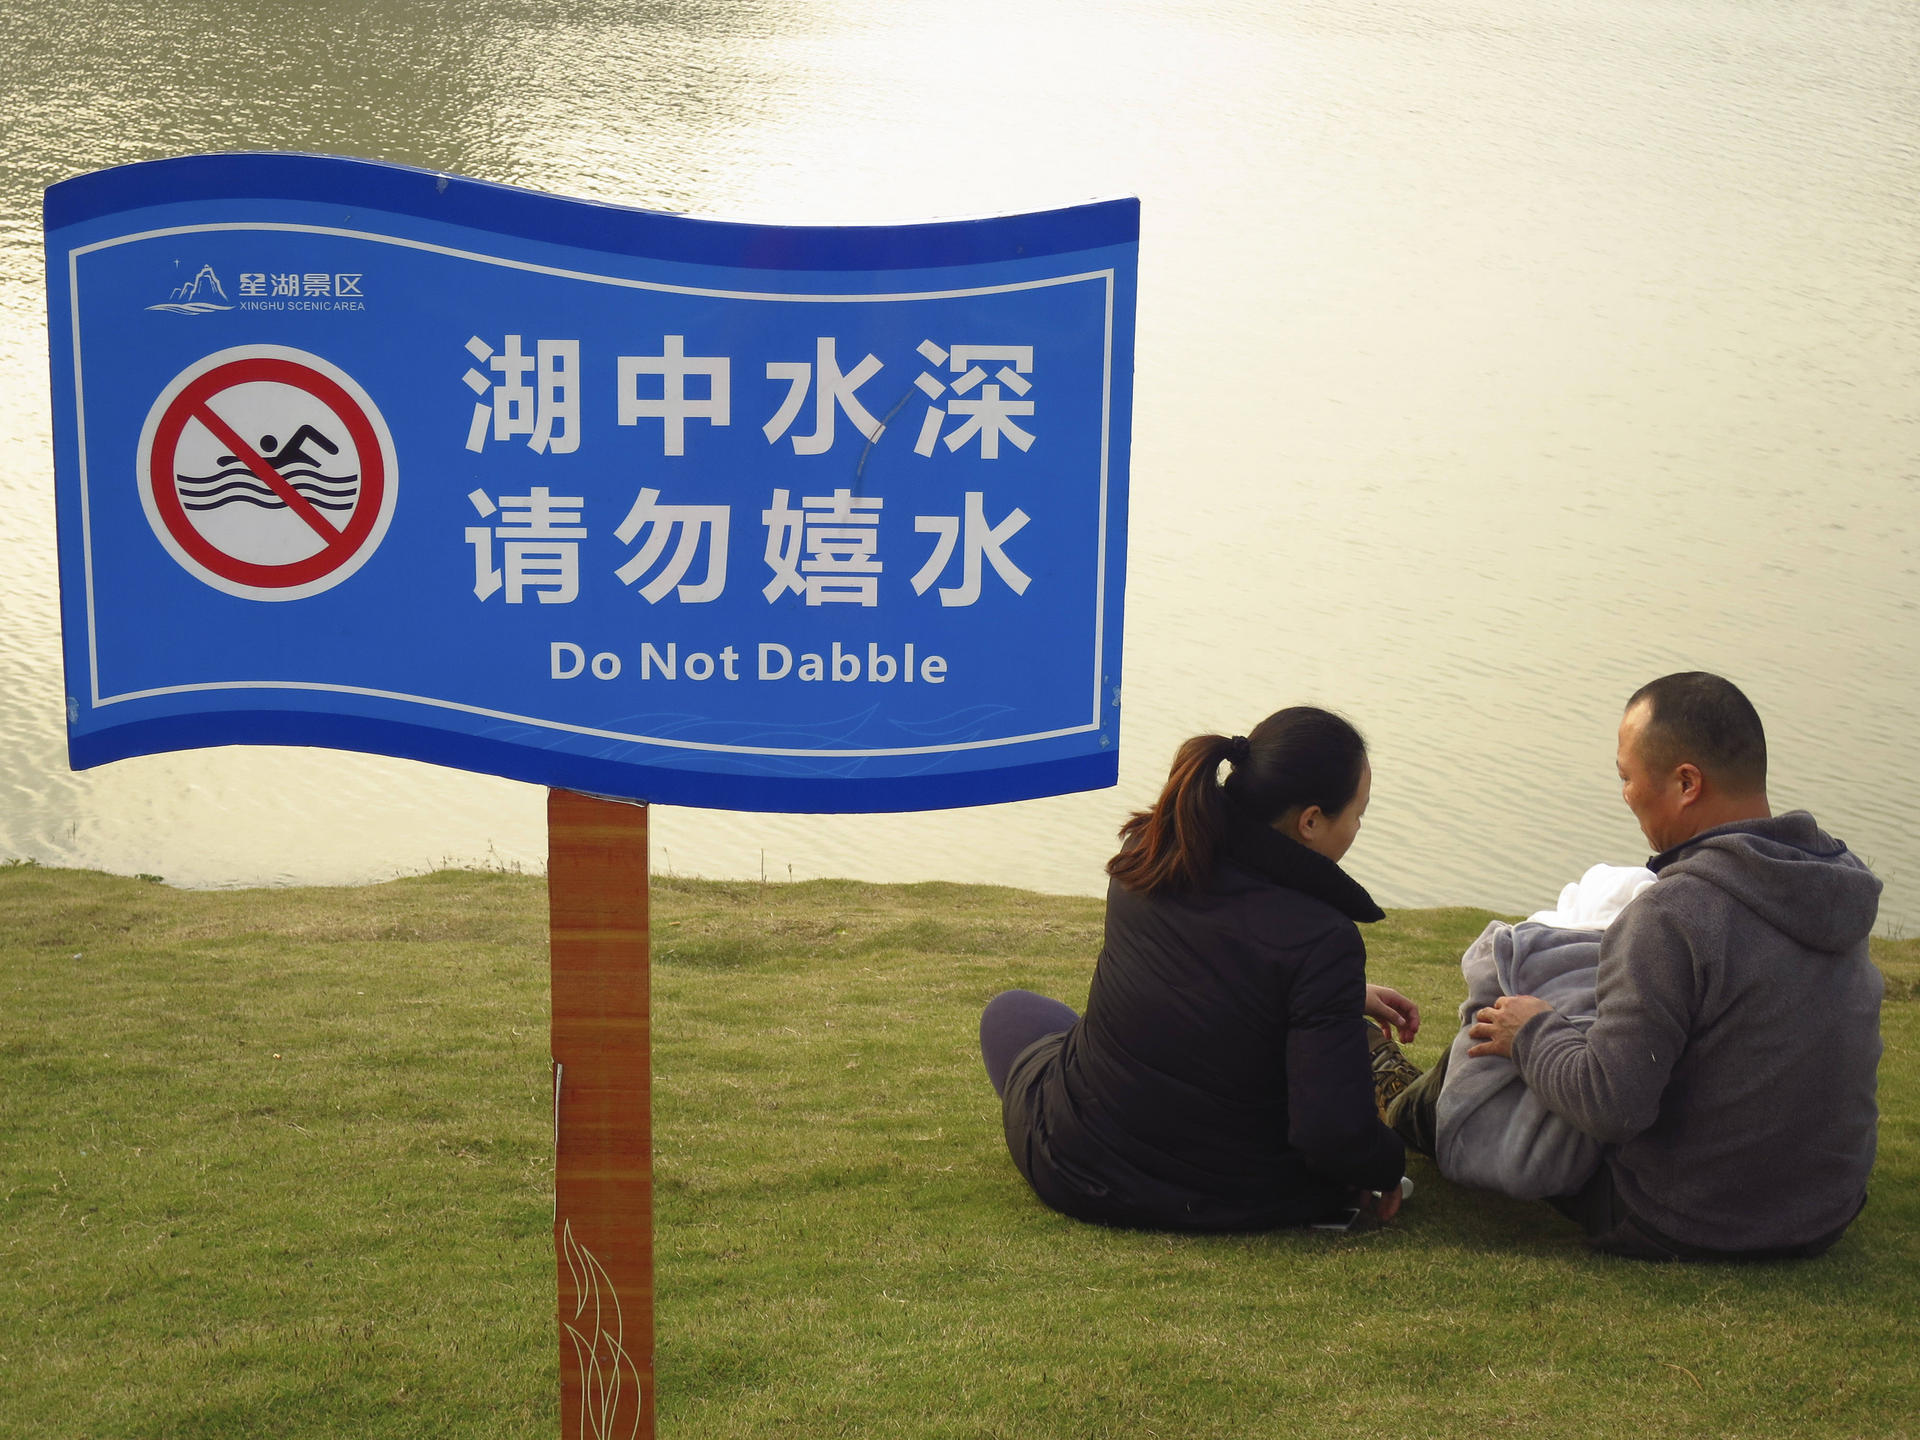 In Zhaoqing, don't even think about dabbling. Photo: Cecilie Gamst Berg